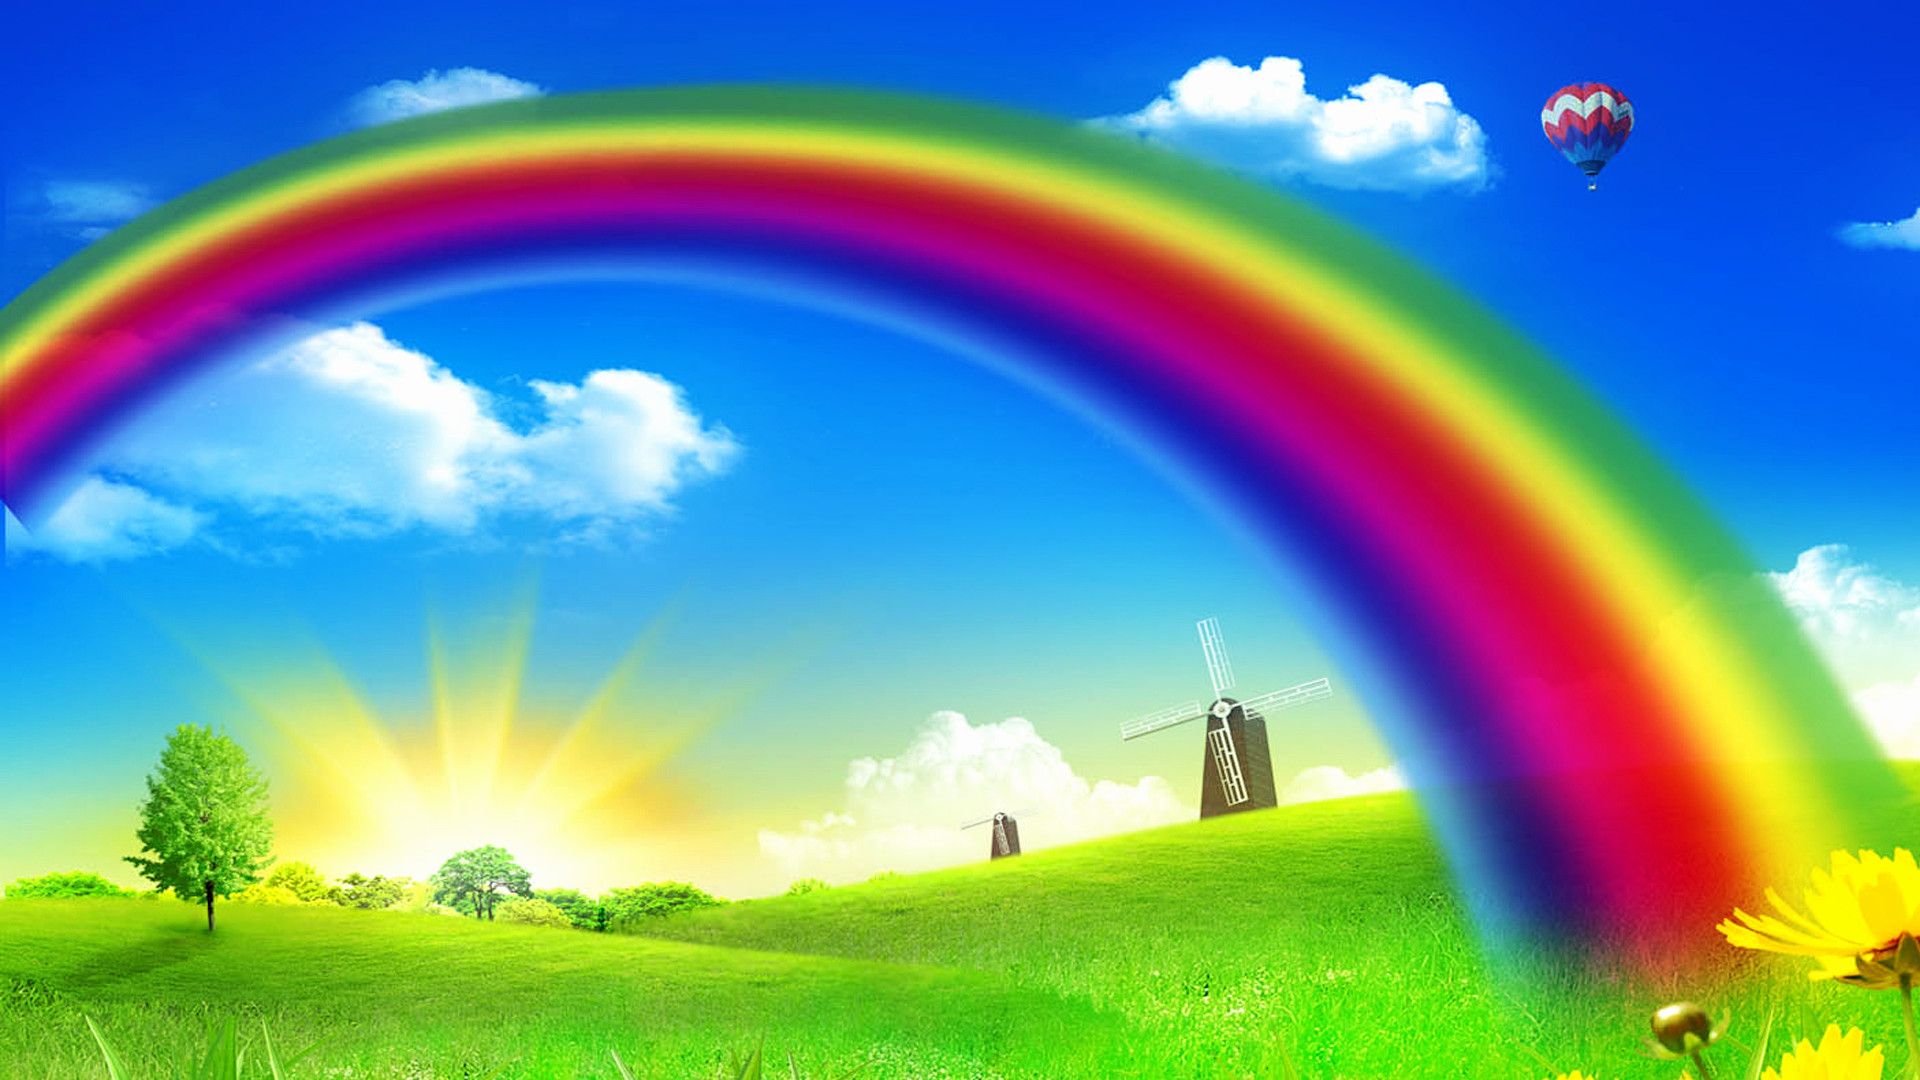 Sky Clouds Rainbow Wallpapers - 4k, HD Sky Clouds Rainbow Backgrounds